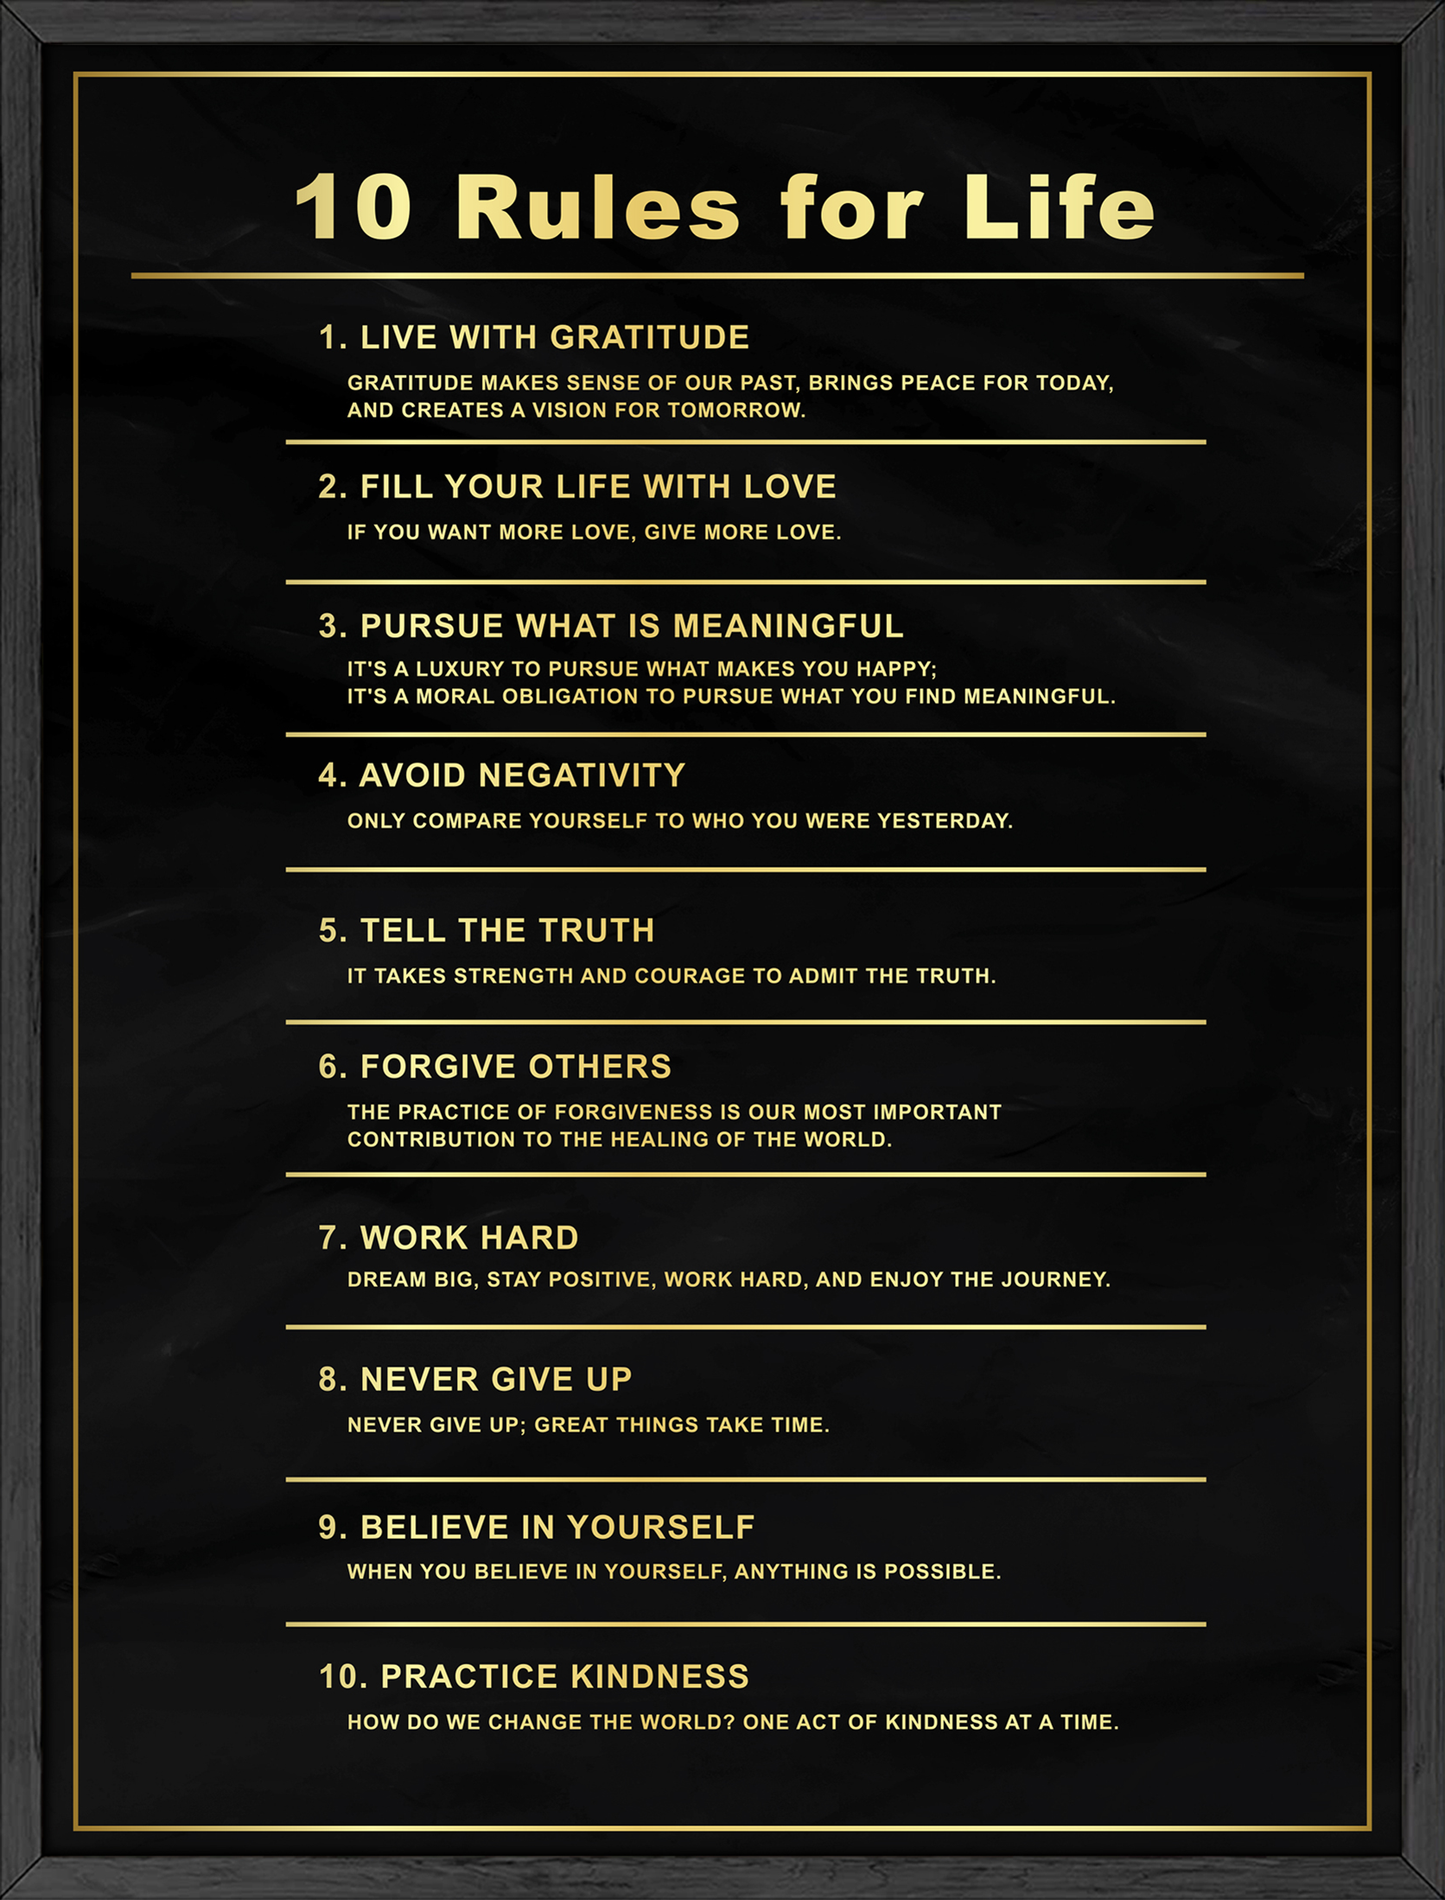 10 rules for life